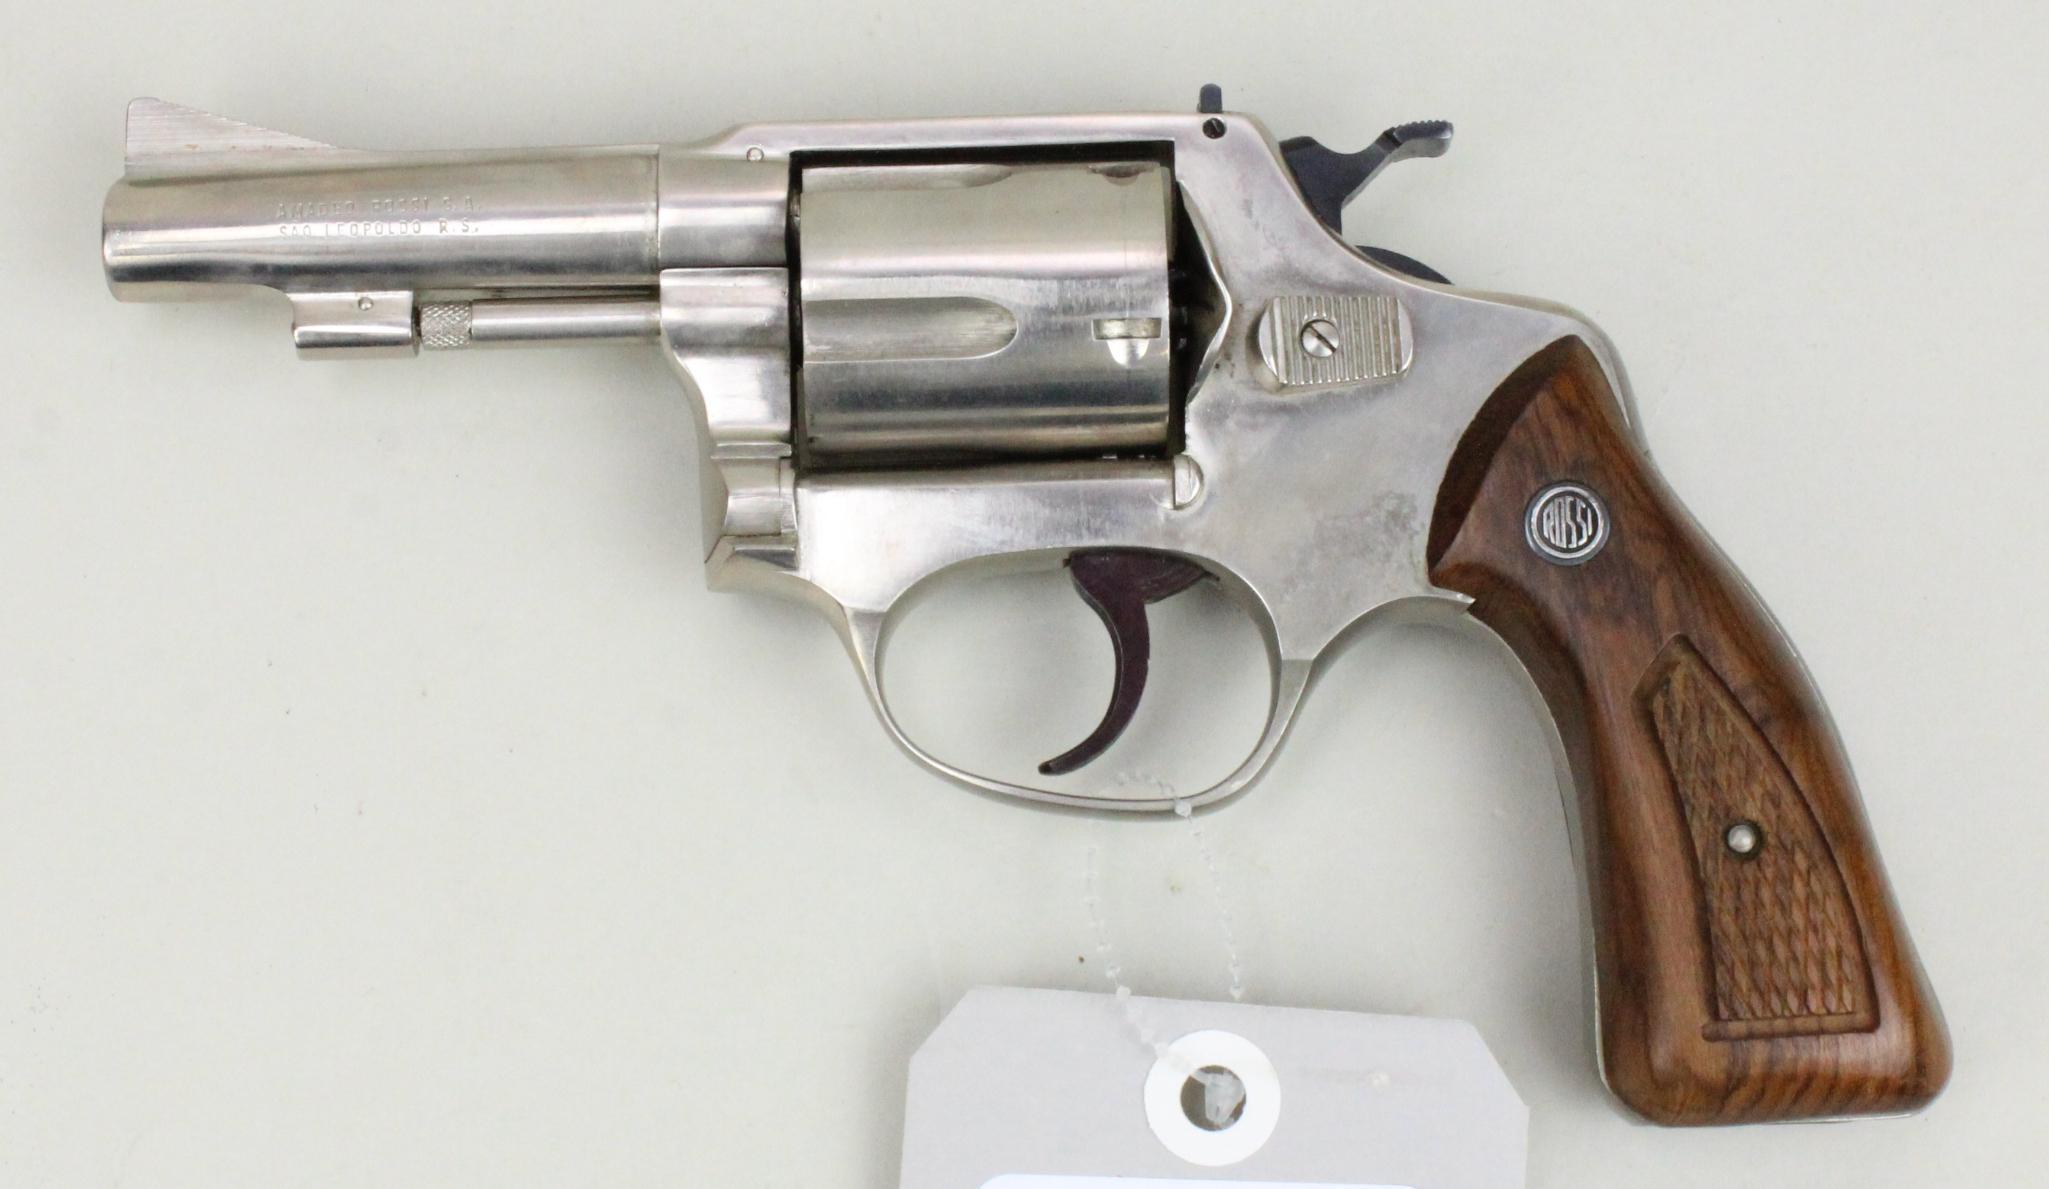 Rossi Model 68 double action revolver.